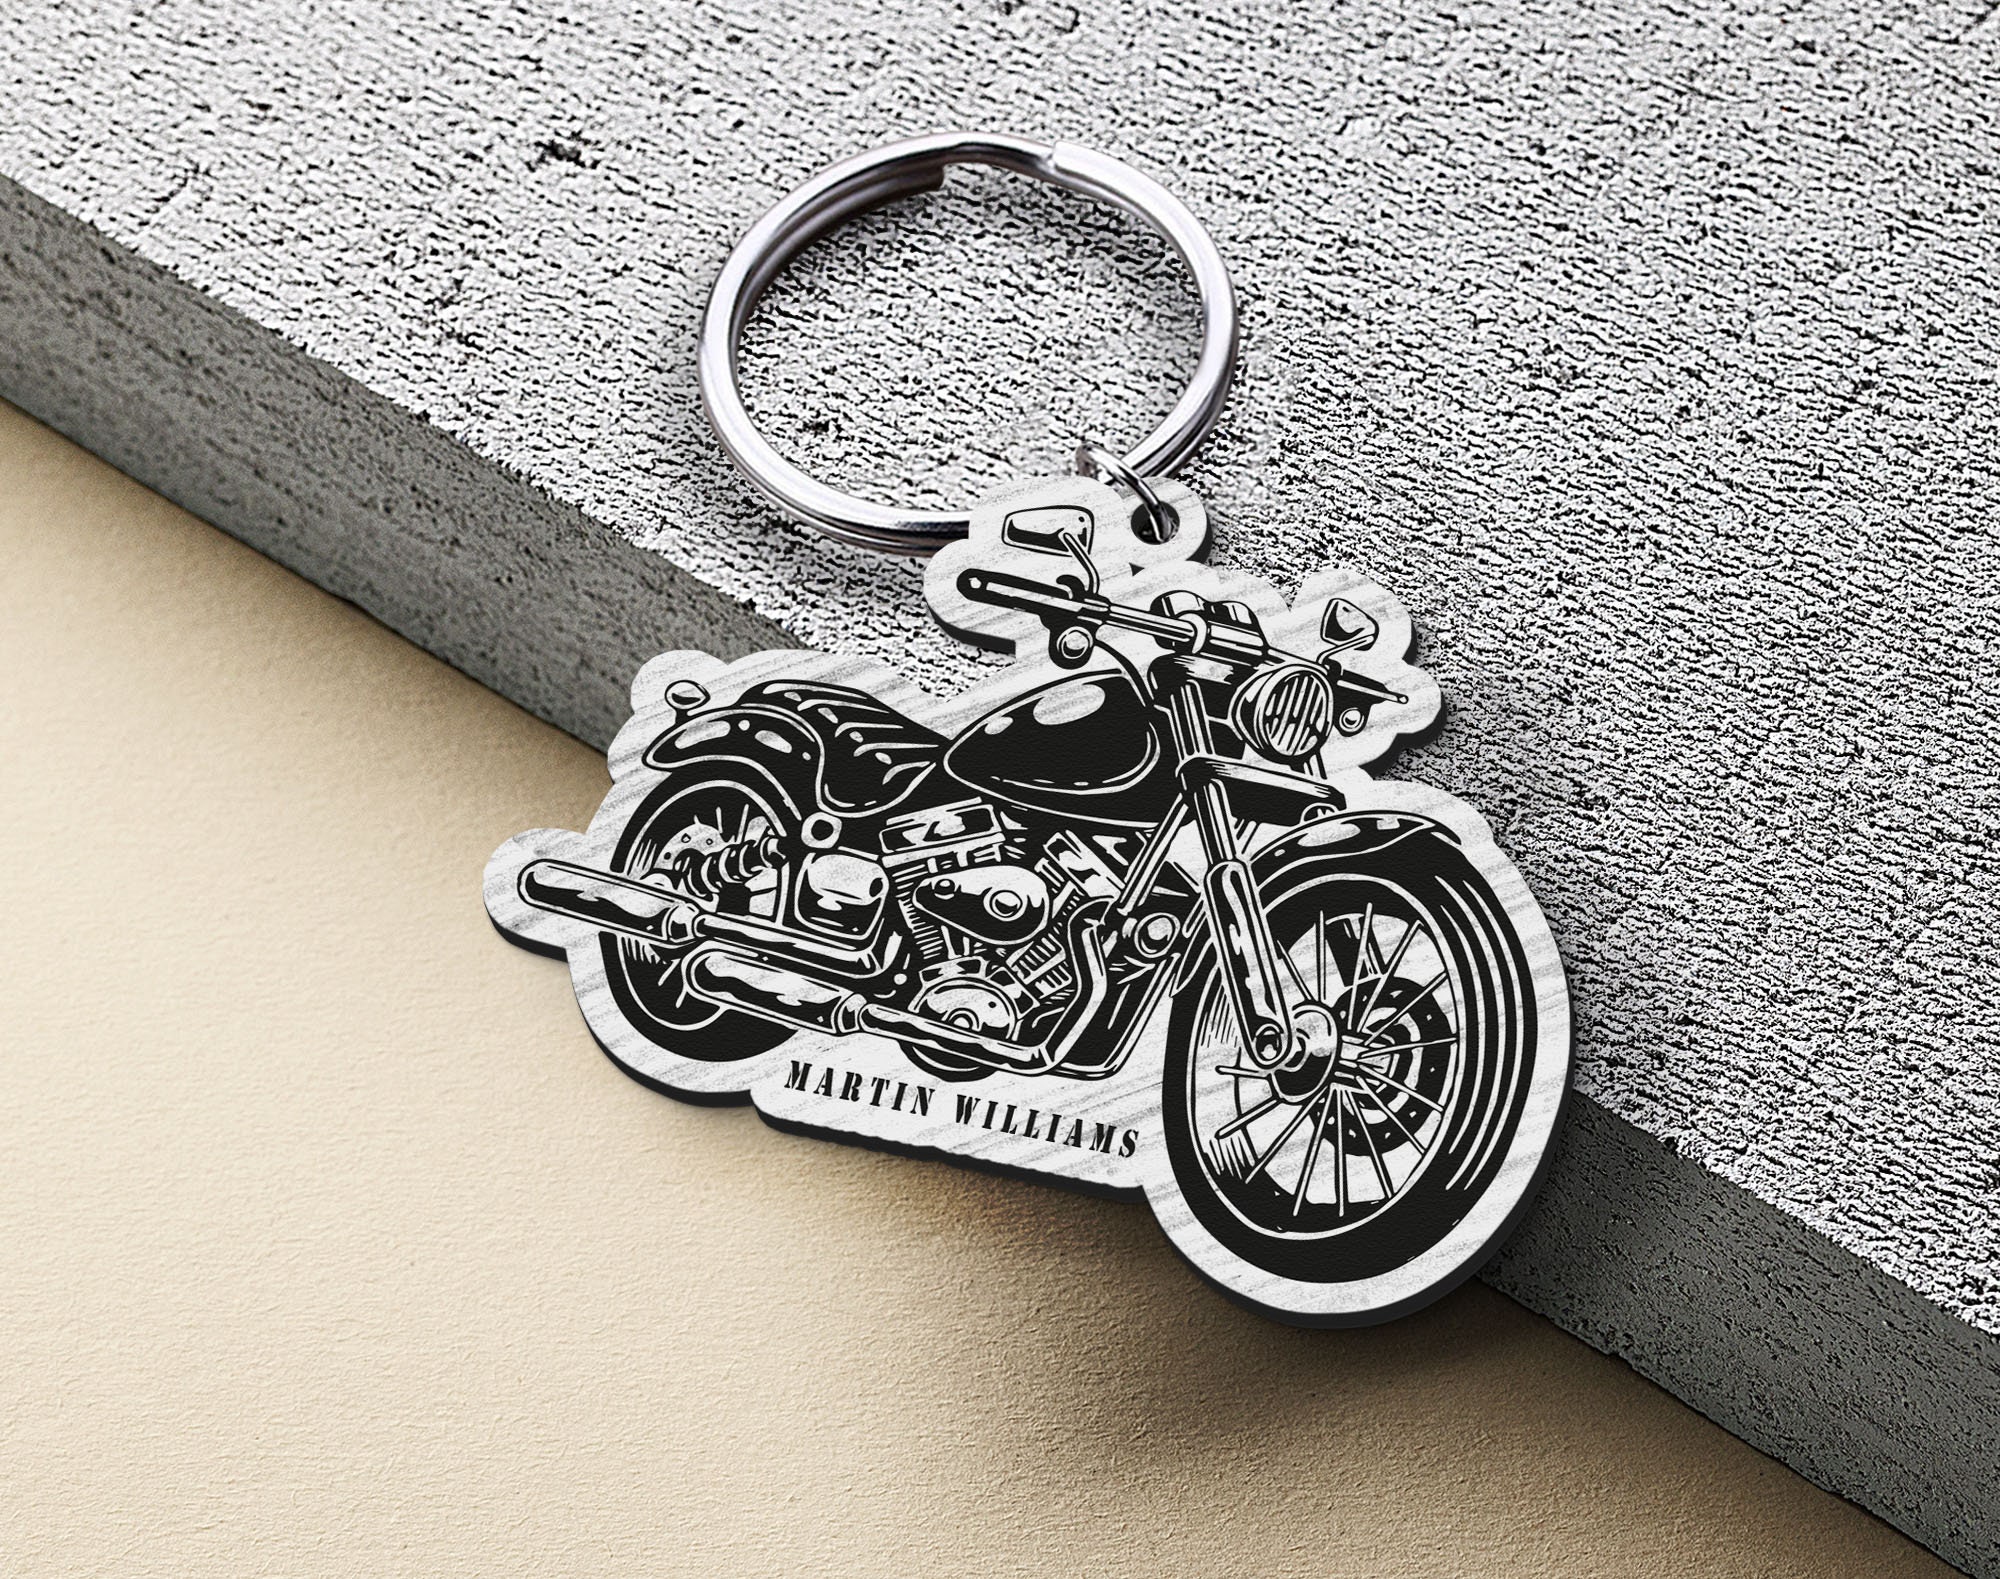 mvcen Personalized Keychain, Custom Key Tag Embroidery Car Key Chain , Customized Motorcycle Keychains for Men Women Boys and Girls